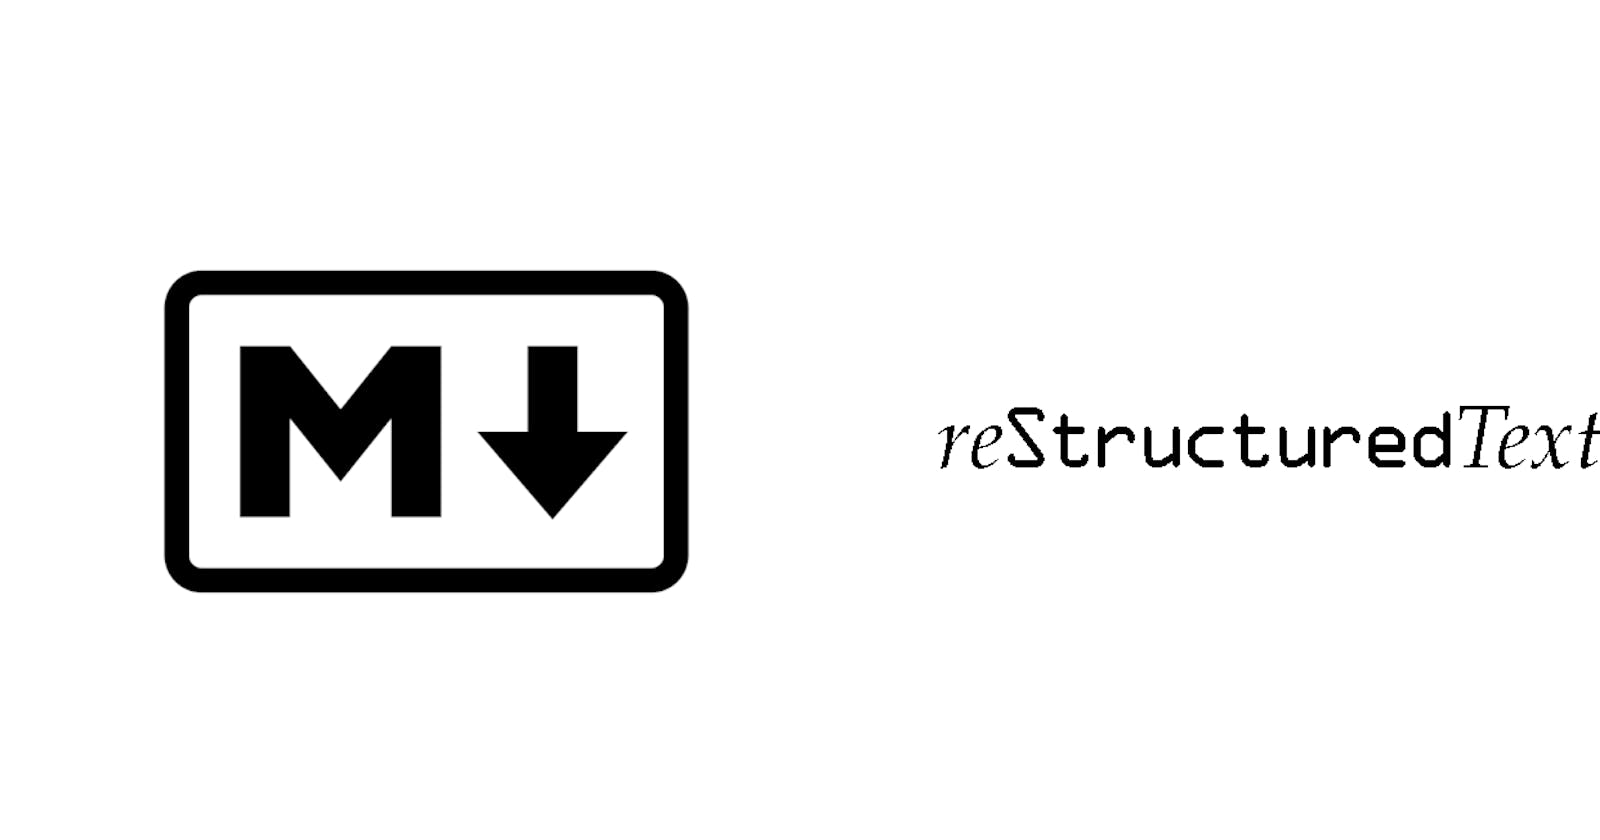 Markdown vs reStructured Text